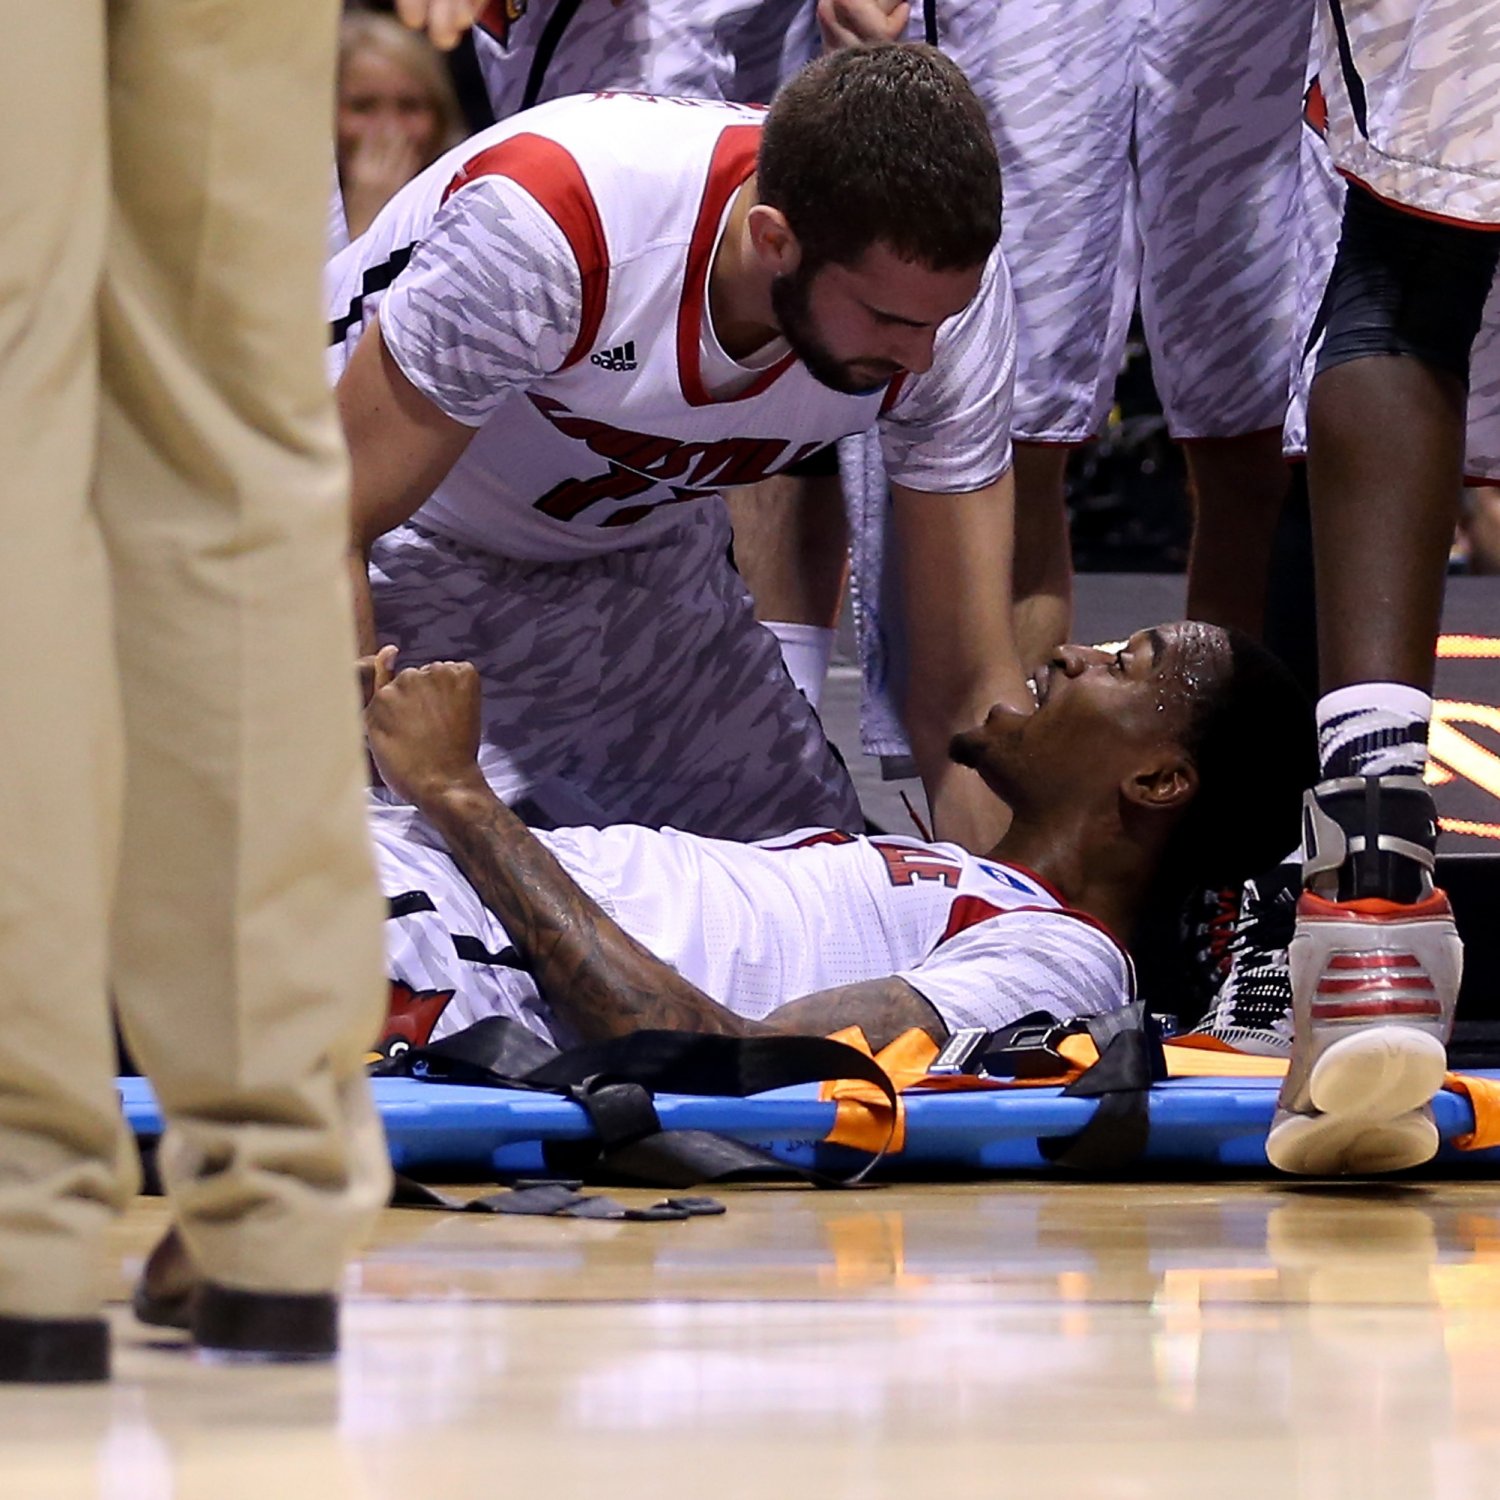 Kevin Ware Injury: Reaction to Gruesome Break Shows Louisville&#39;s United Culture | Bleacher Report